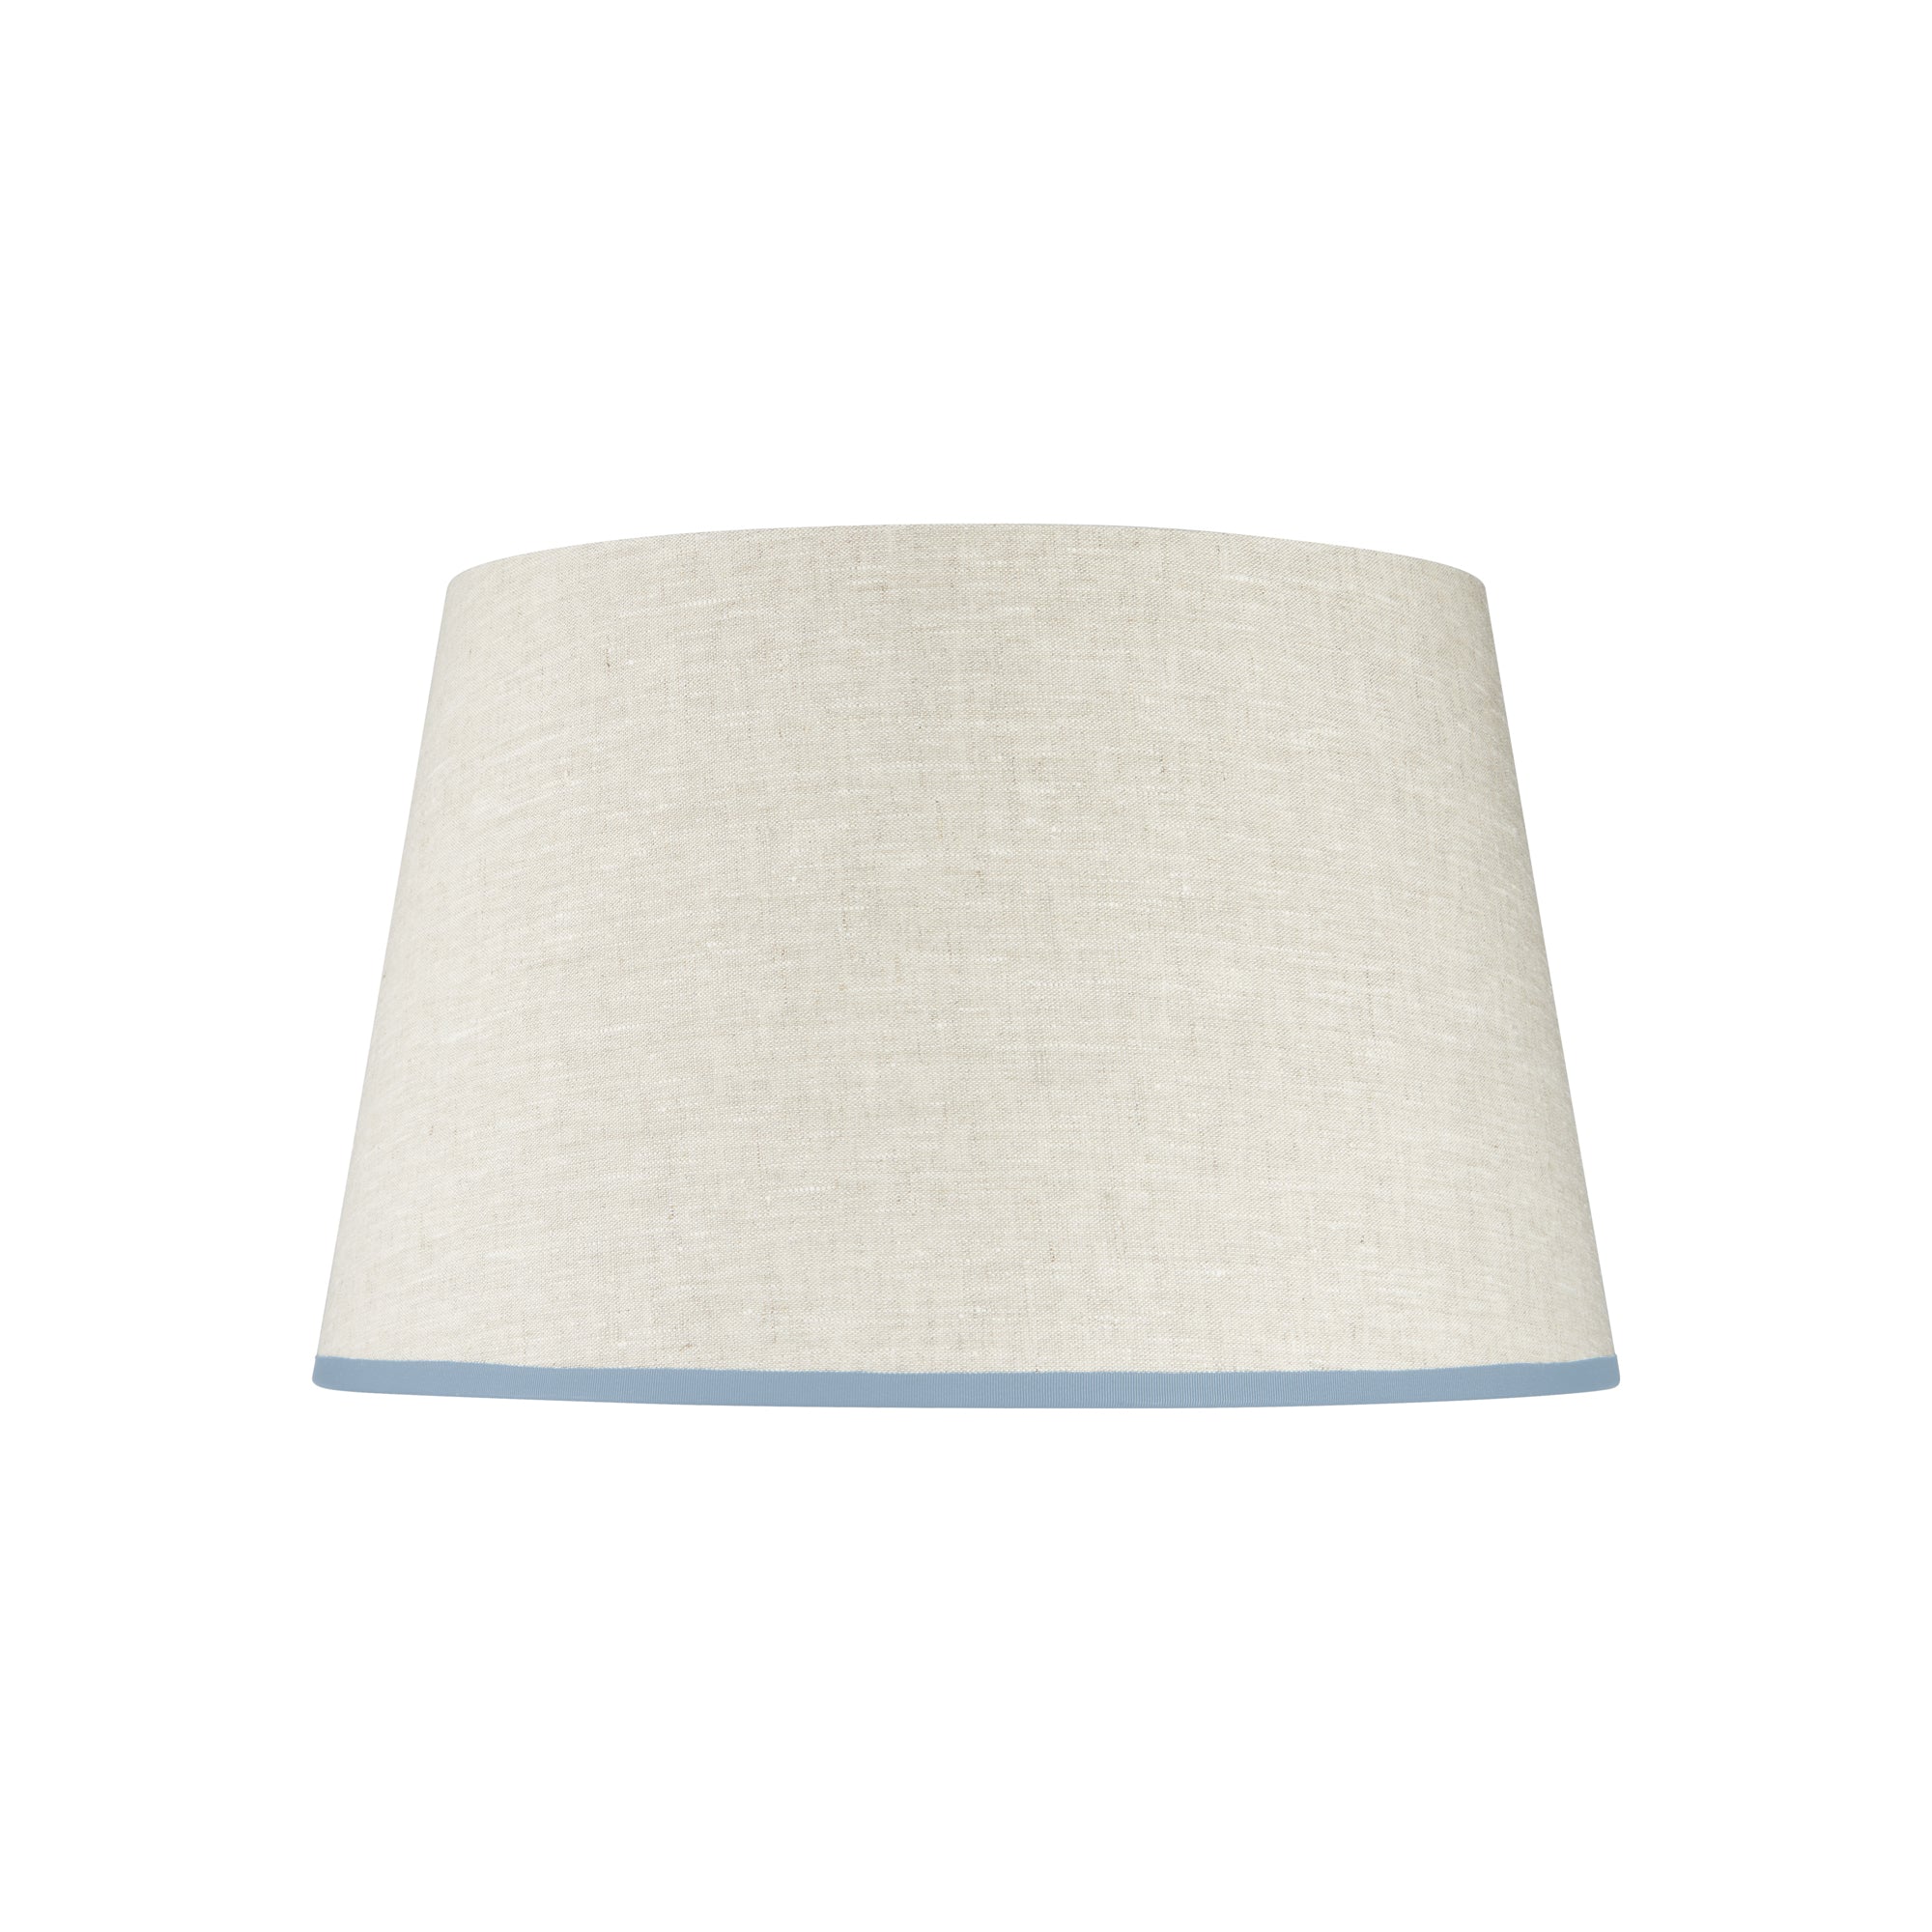 STRETCHED CREAM  LINEN LAMPSHADE WITH SKY BLUE TRIM